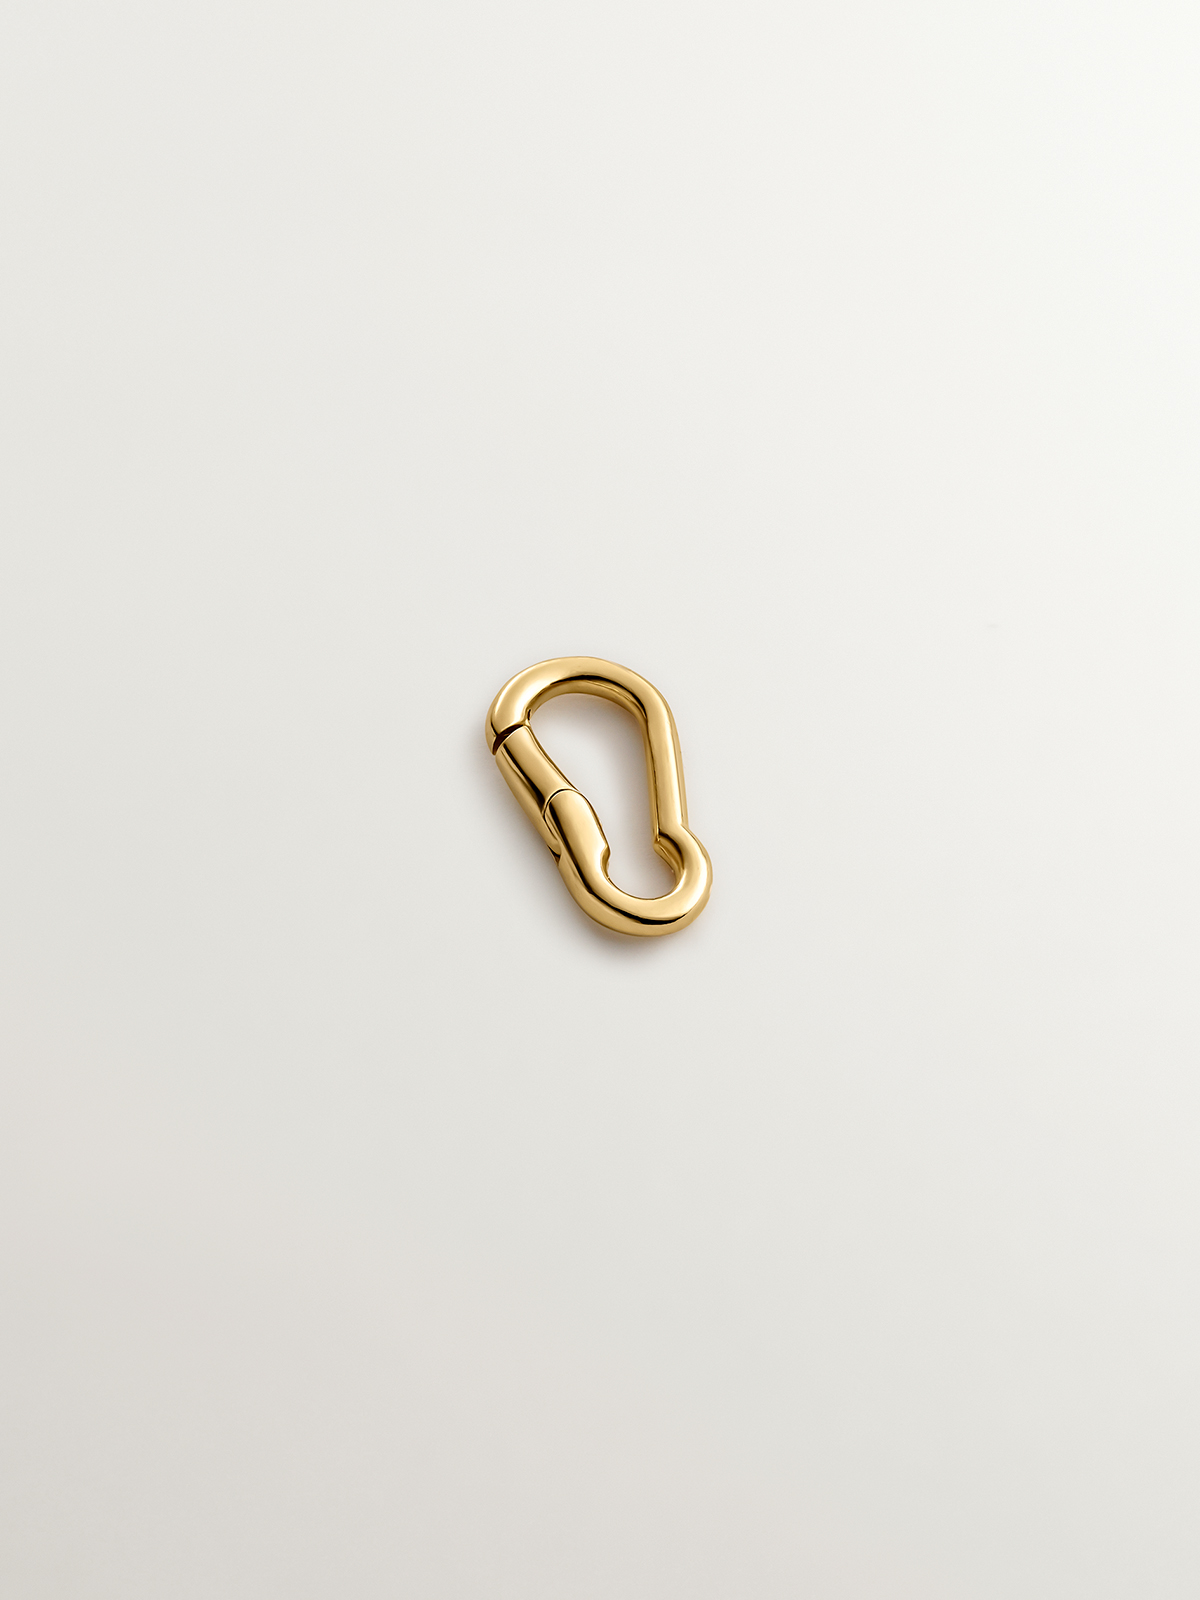 925 Silver carabiner charm plated in 18K yellow gold